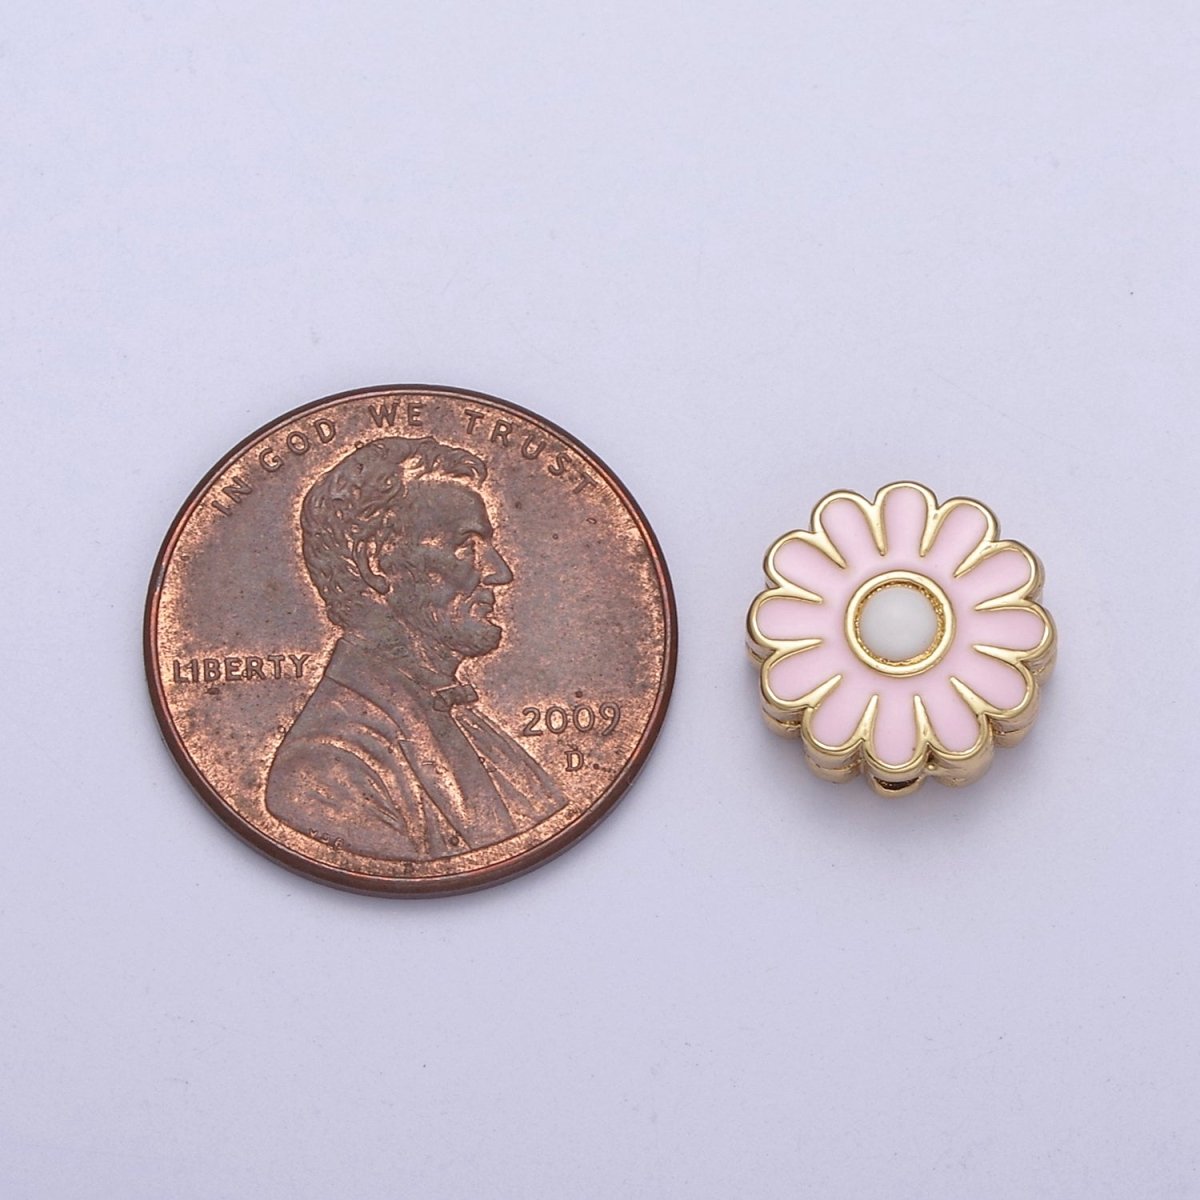 10mm Daisy Flower Bead Spacer Pink Mini Floral Nature Gold Filled Art Jewelry Making Beads B-773 - DLUXCA